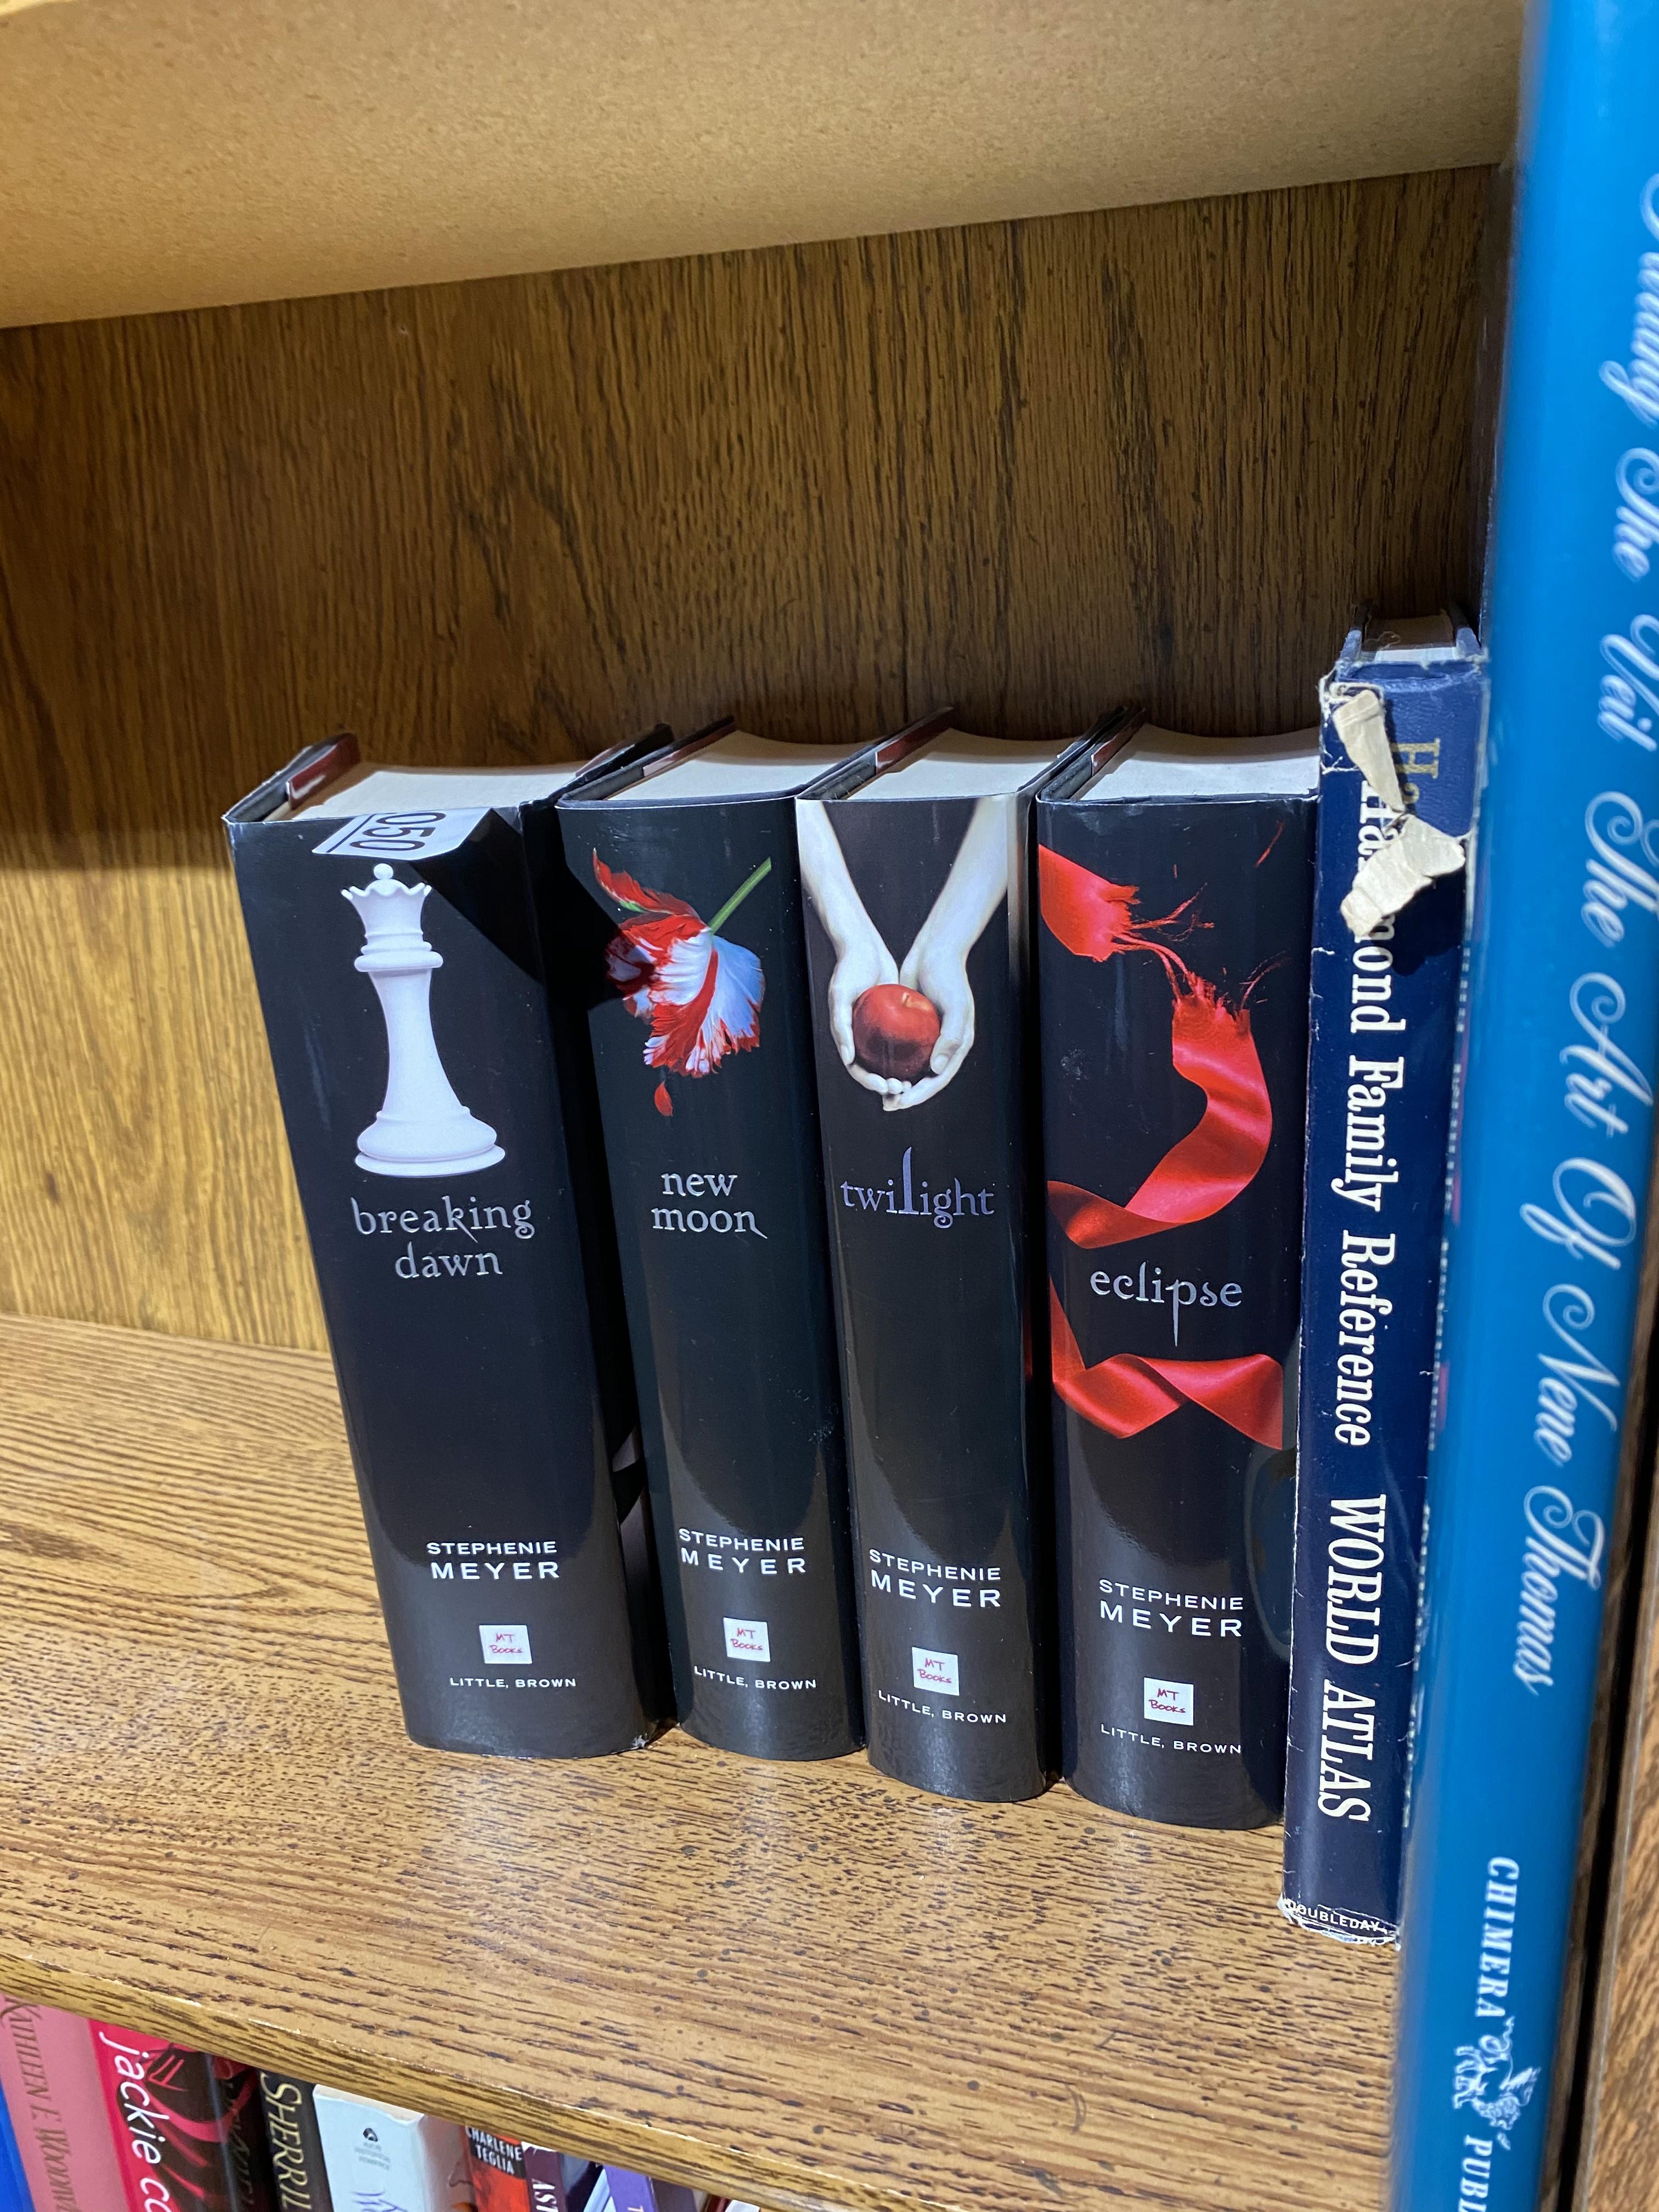 Group of books including Twilight series